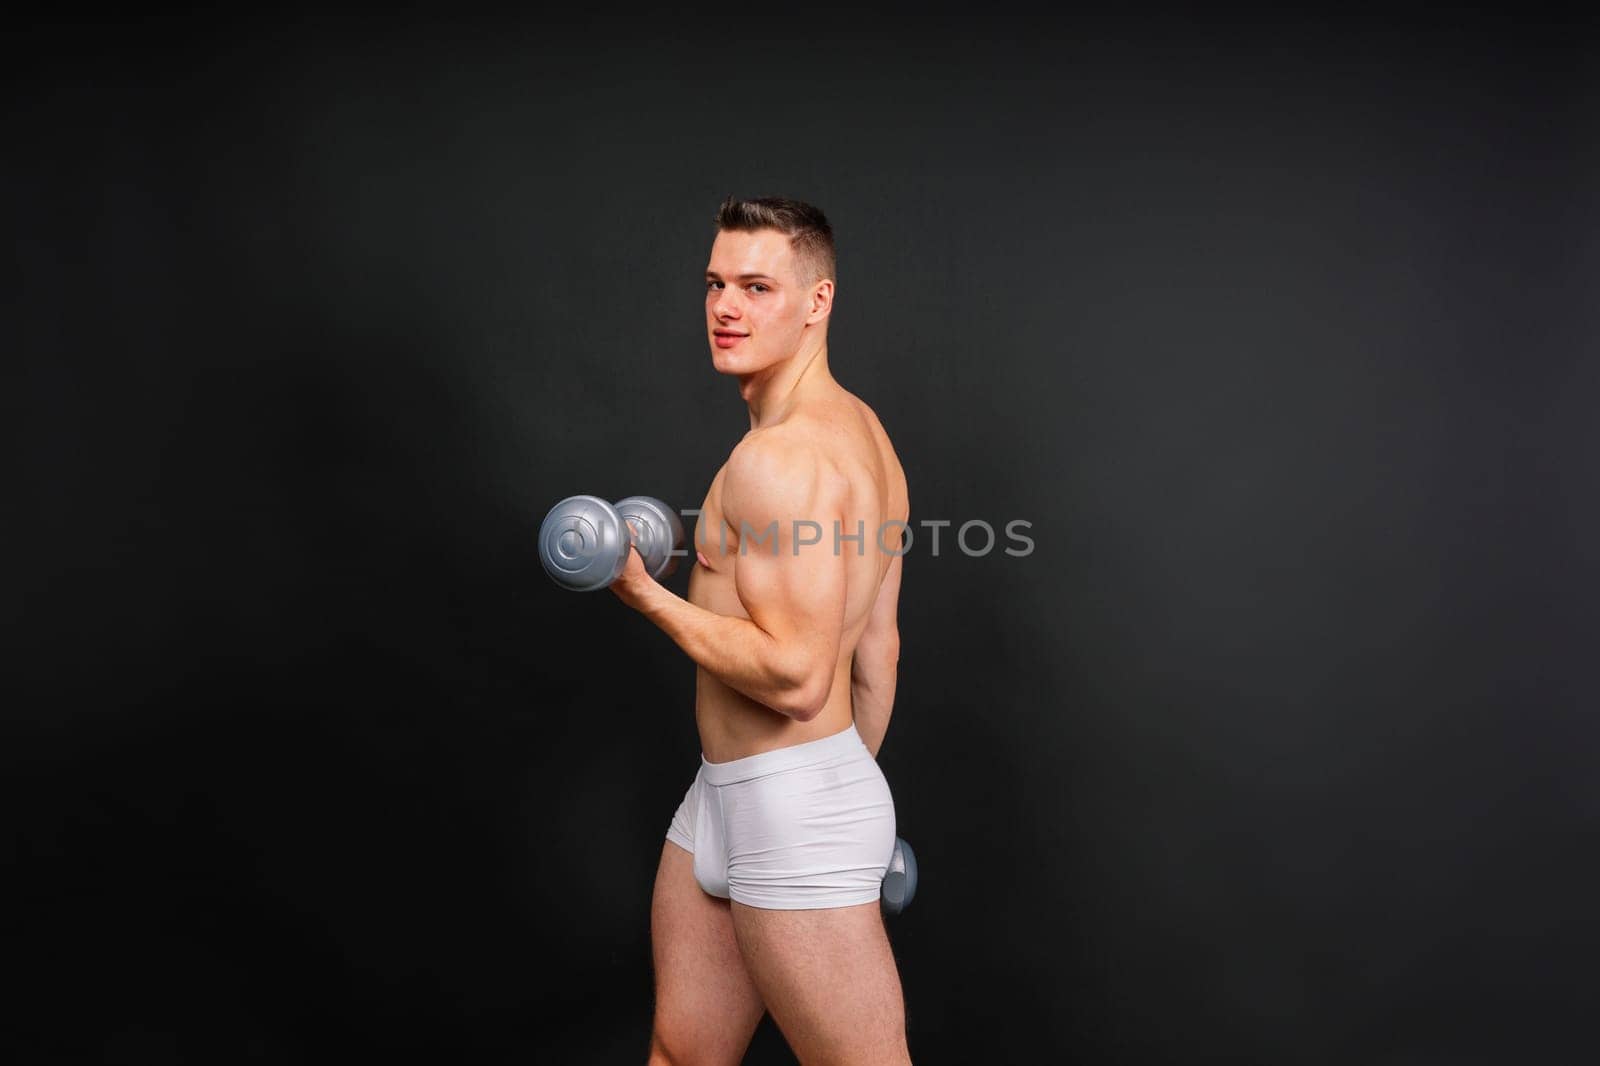 Man with pumped-up body with dumbbells in his hands white panties exercise